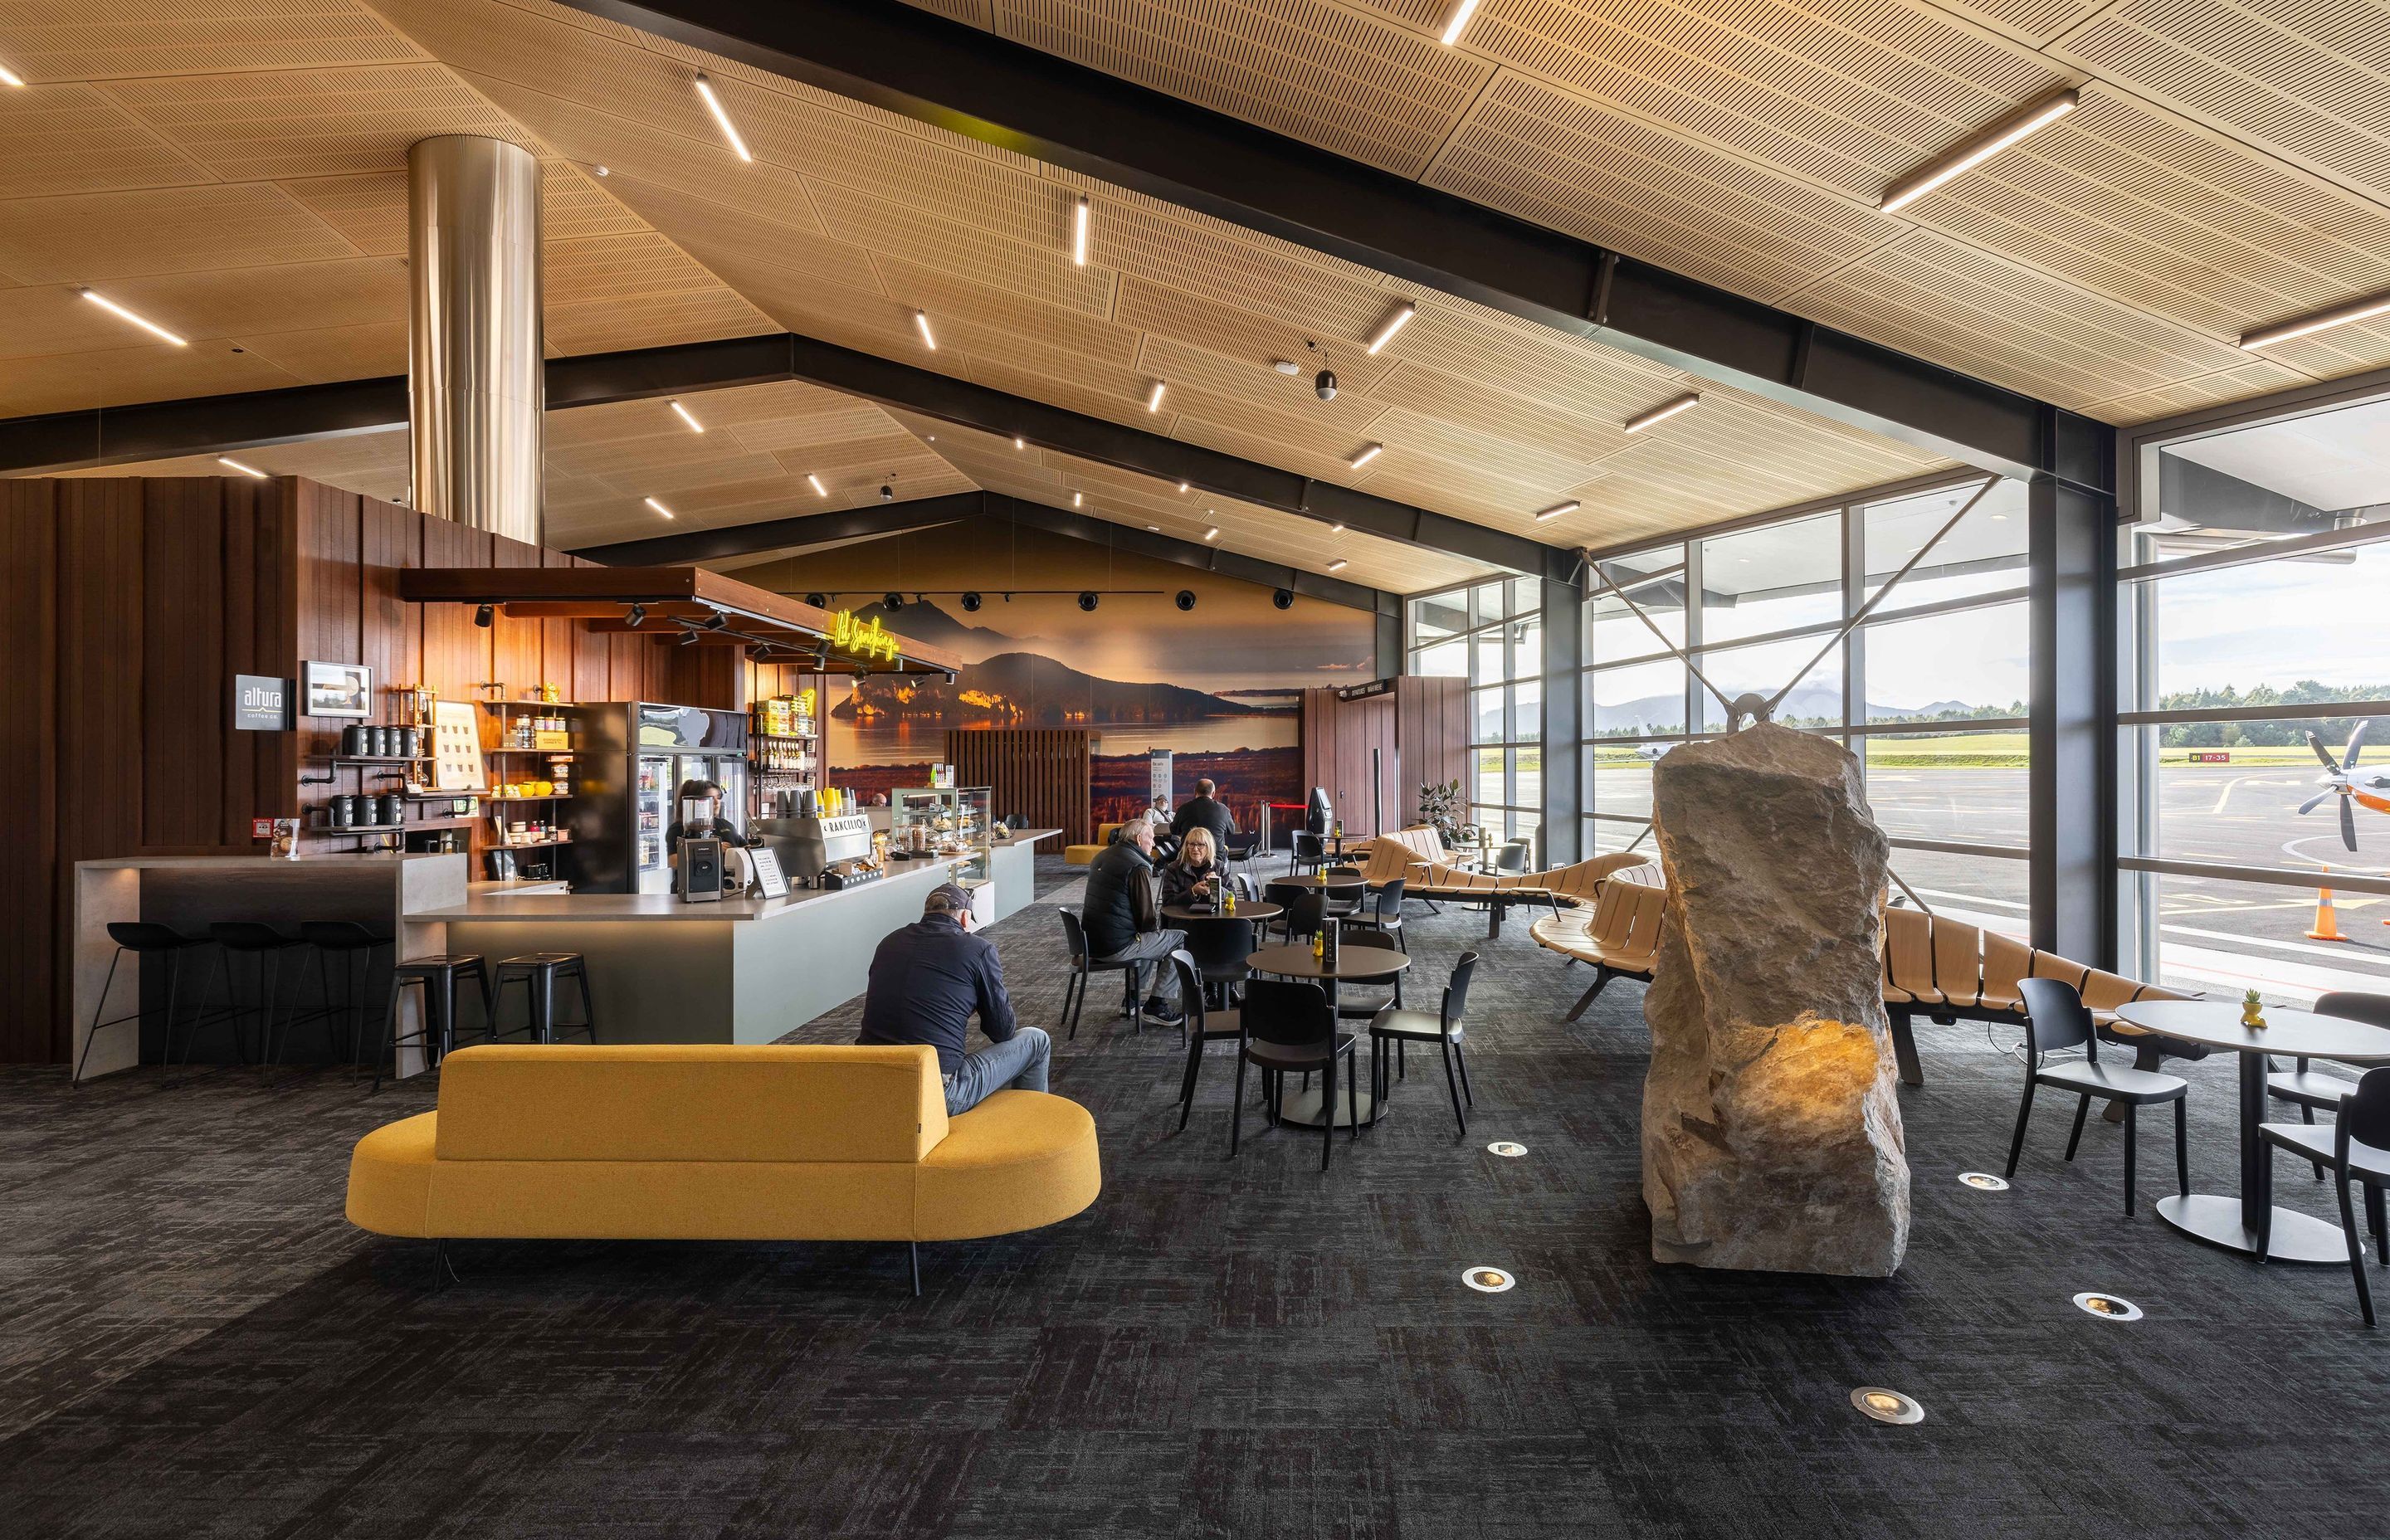 Featurecraft’s FR Birch Plywood panels worked to capture the distinct beauty of the region in this Taupō Airport project